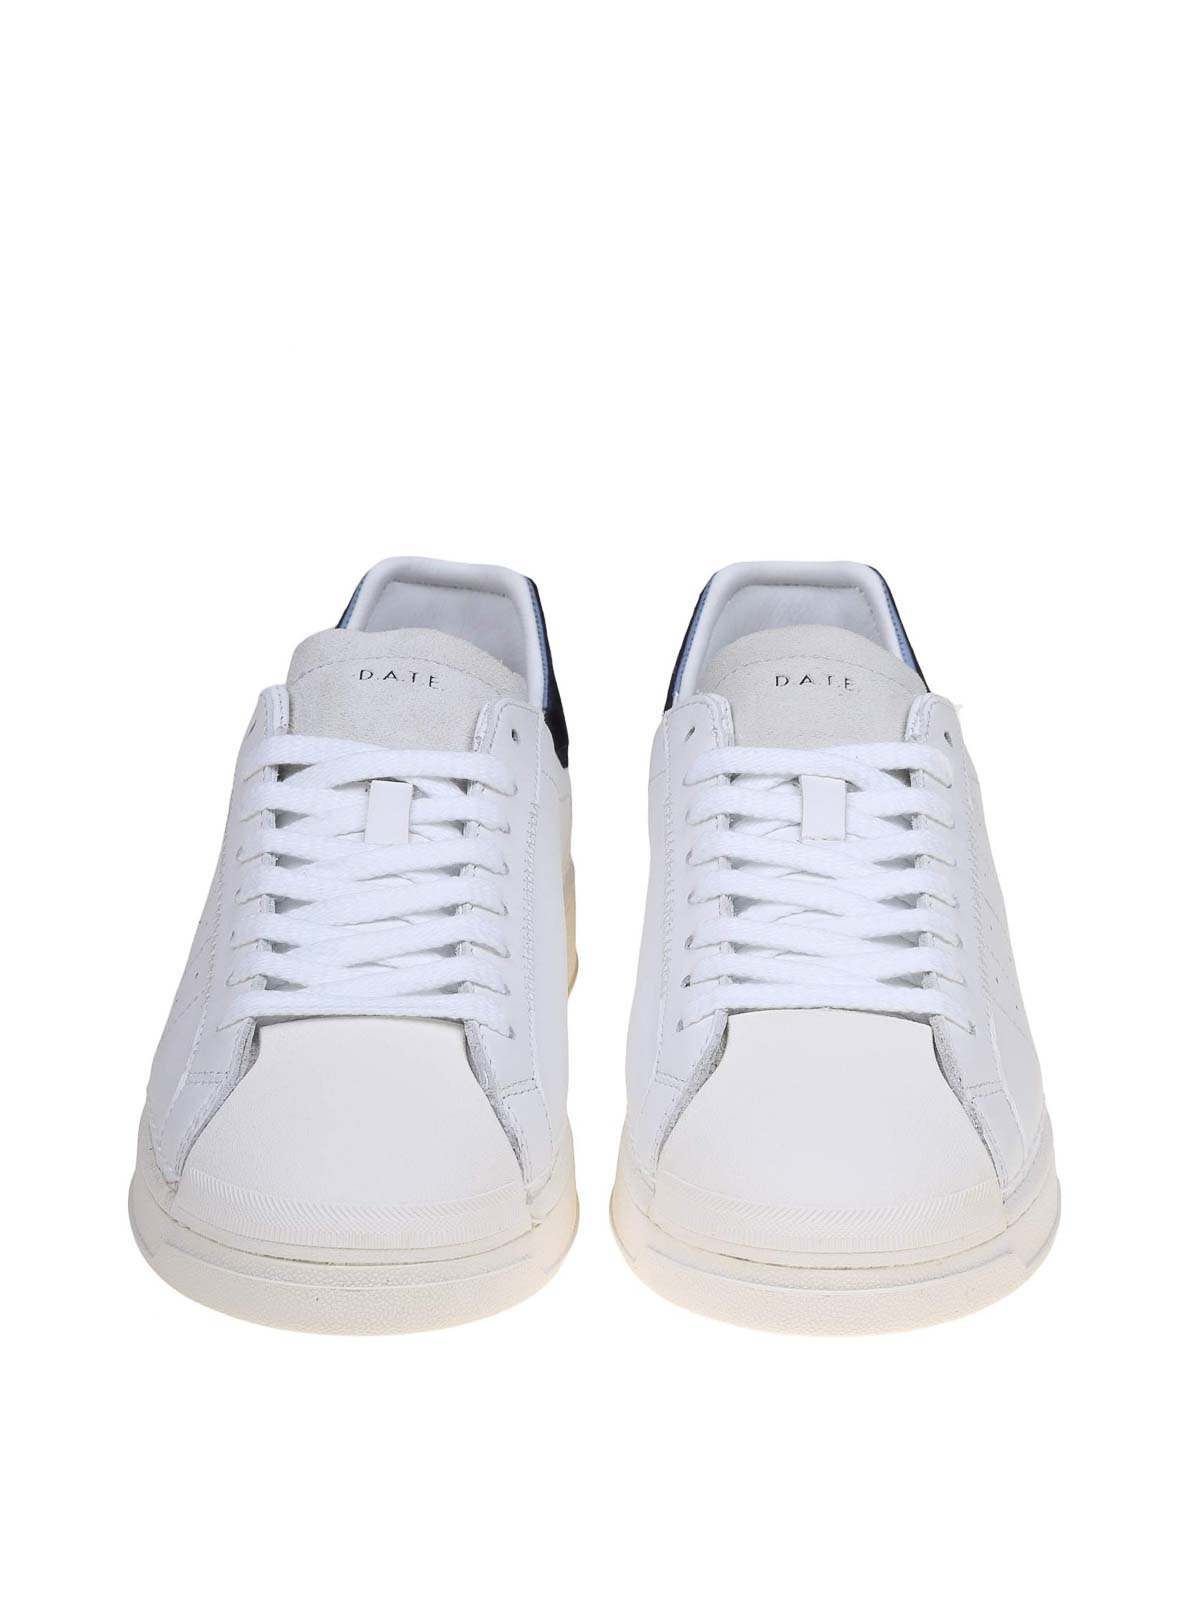 Shop Date Leather Sneakers In Blanco